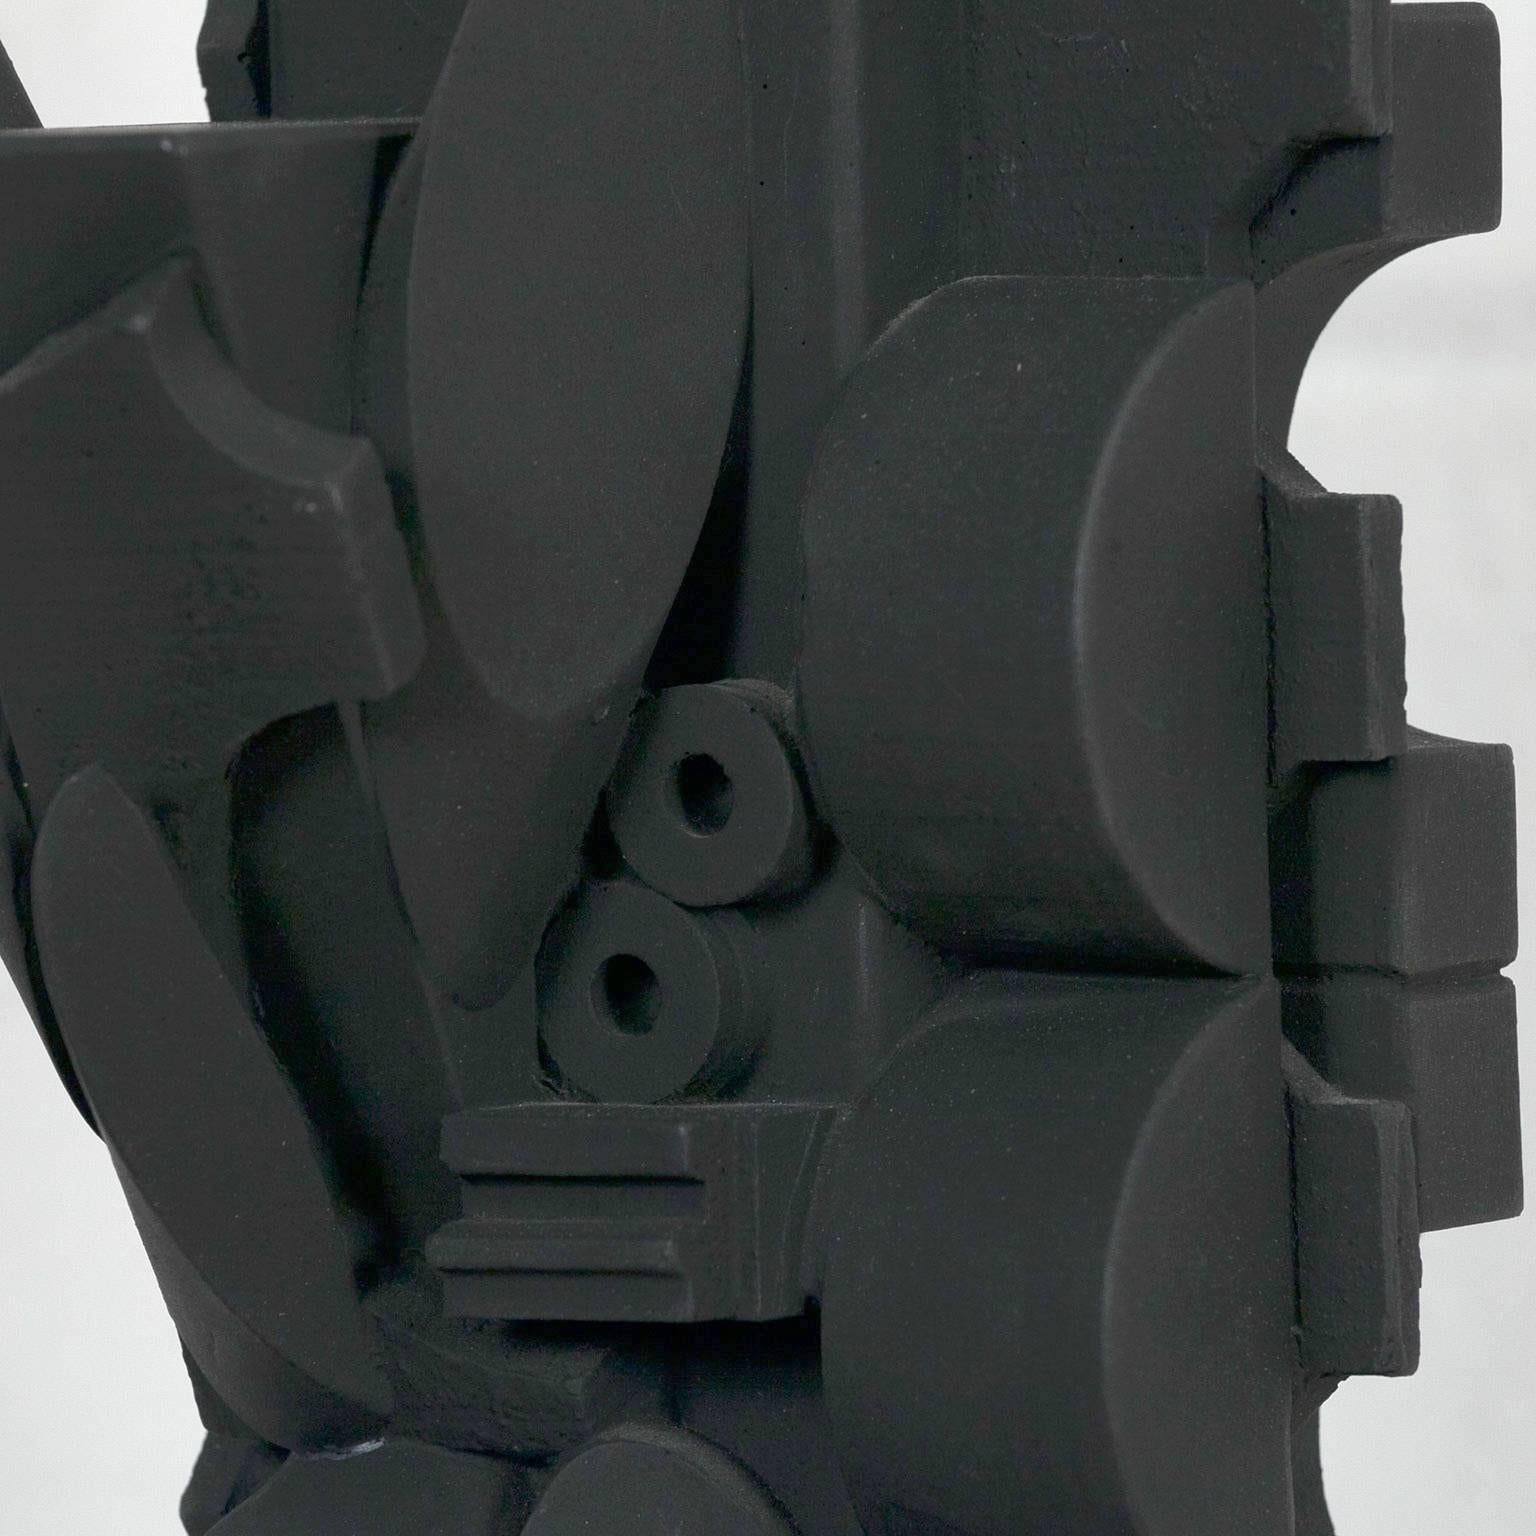 The Dark Ellipse  - Gray Abstract Sculpture by Louise Nevelson